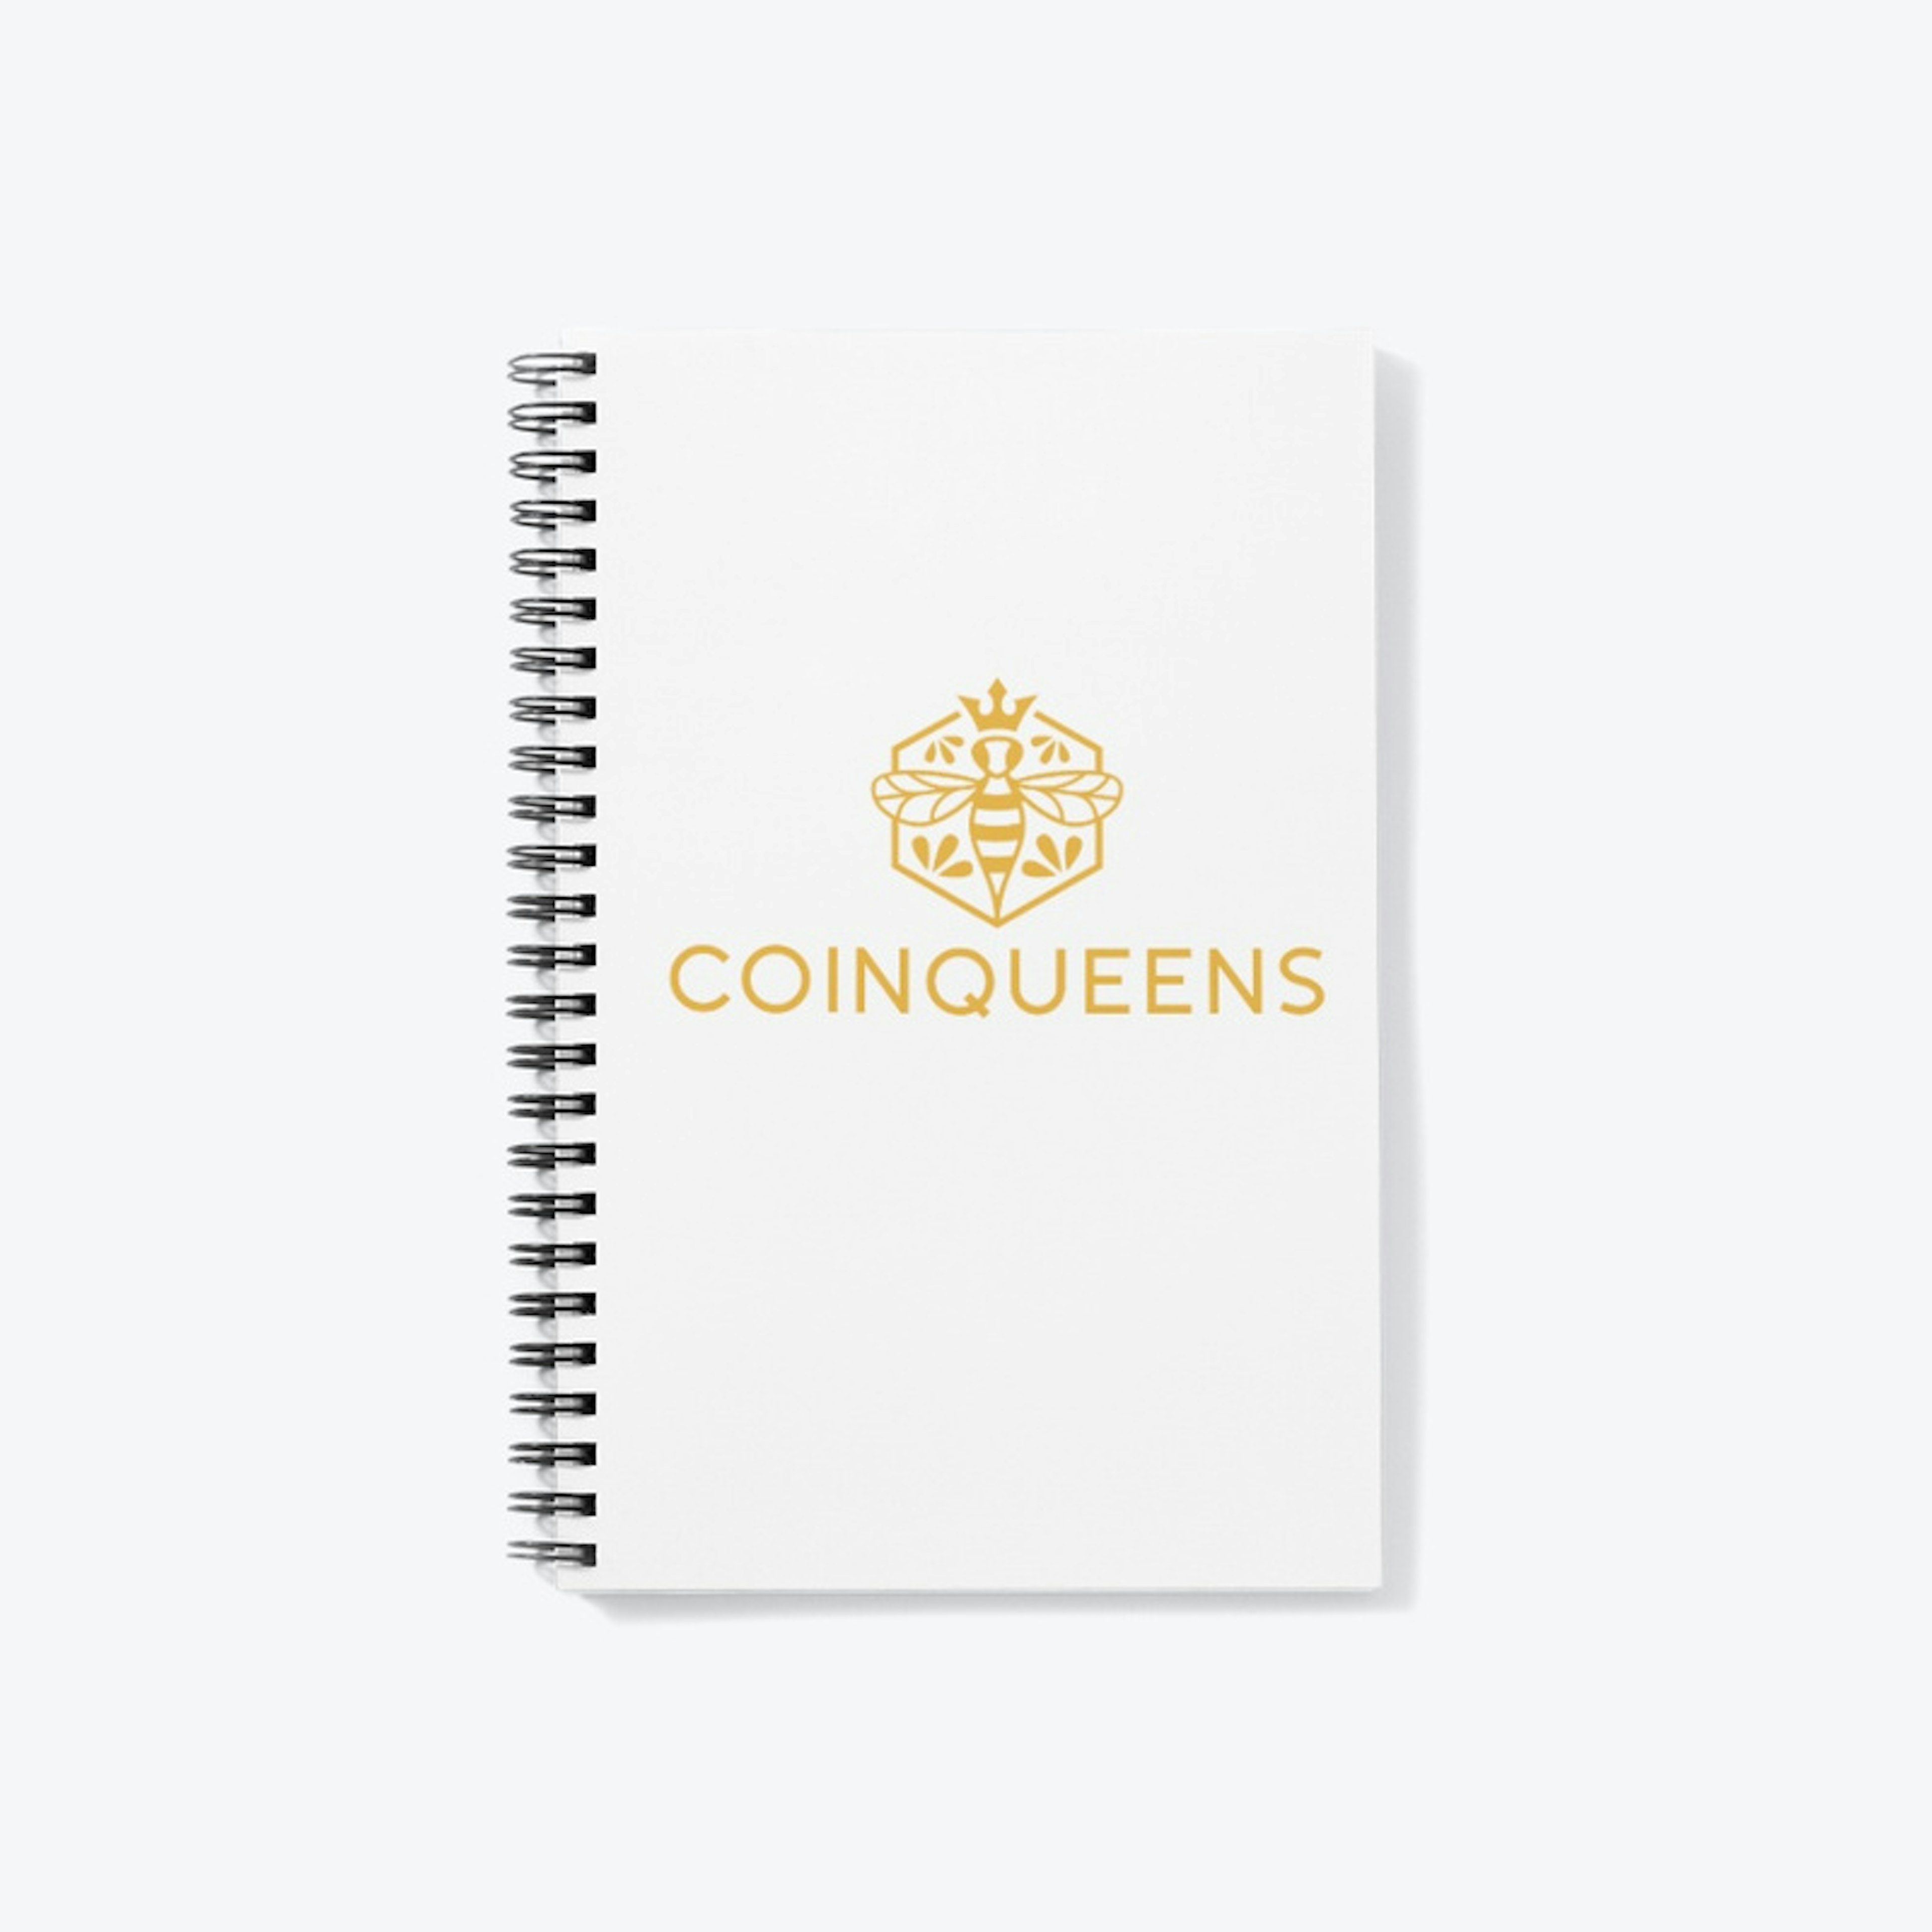 CoinQueens Journal